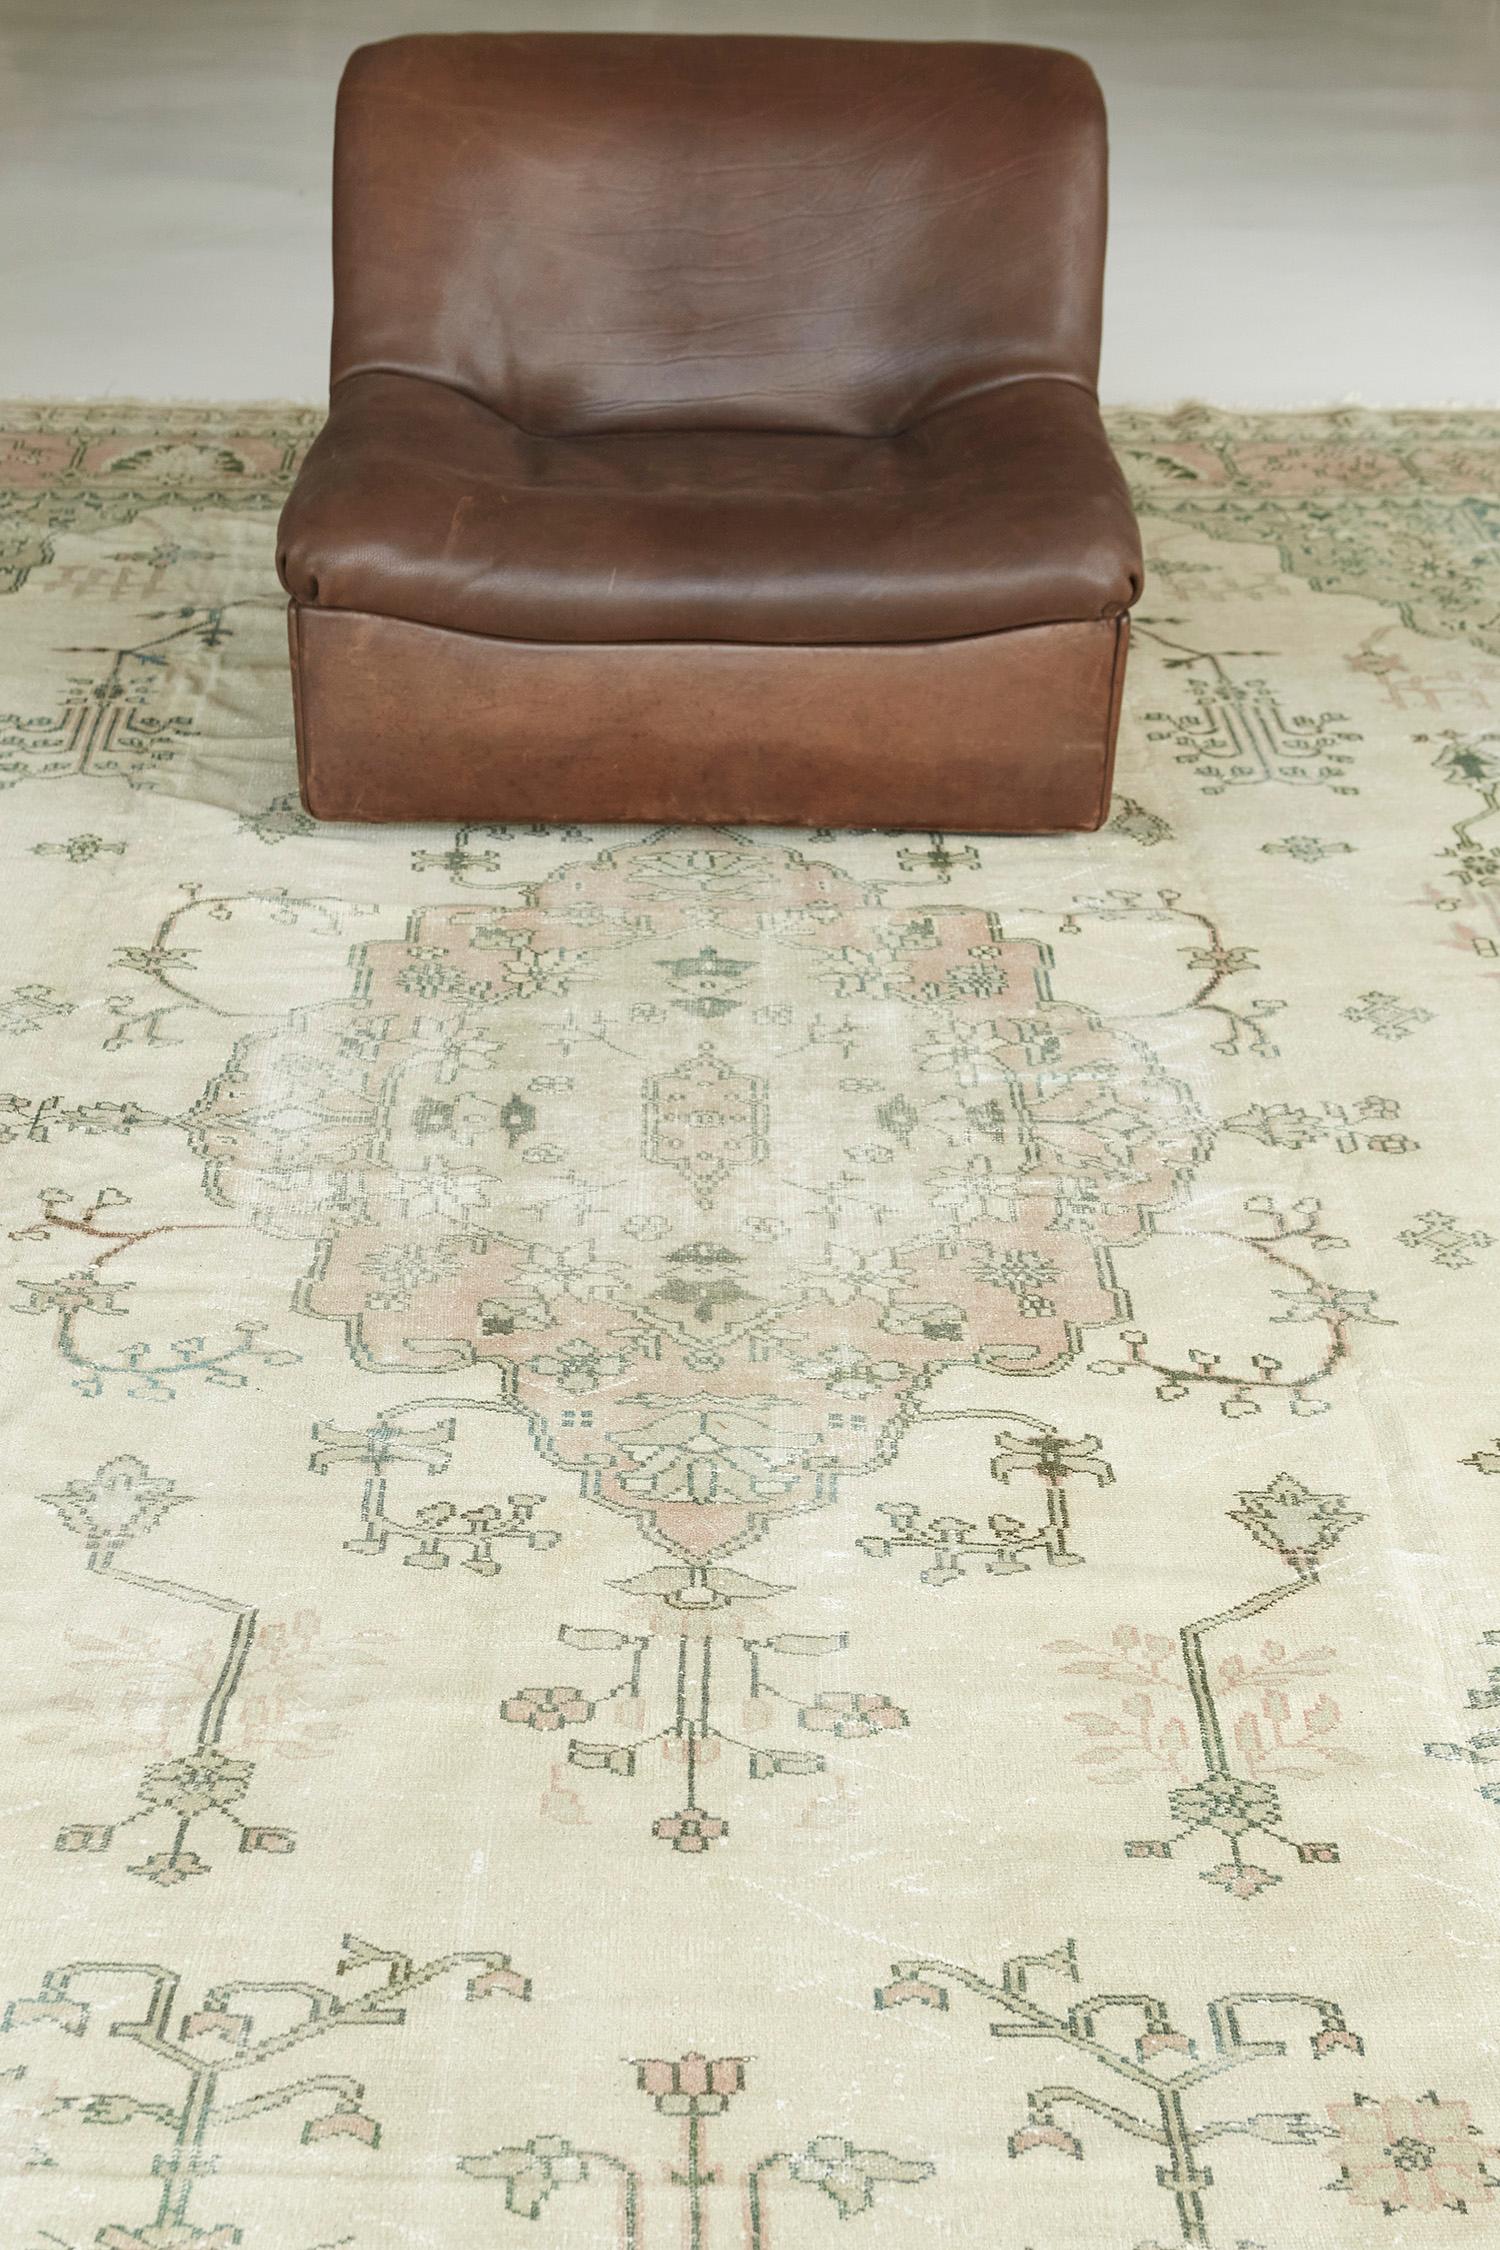 A stylish Vintage Oushak rug in the cool tones of ecru, rose, ocean green, stylized gracefully with majestic botanical details. Boasting its central medallion made of alluring blossoms and meandering vines, this beguiling rug from hand spun wool is